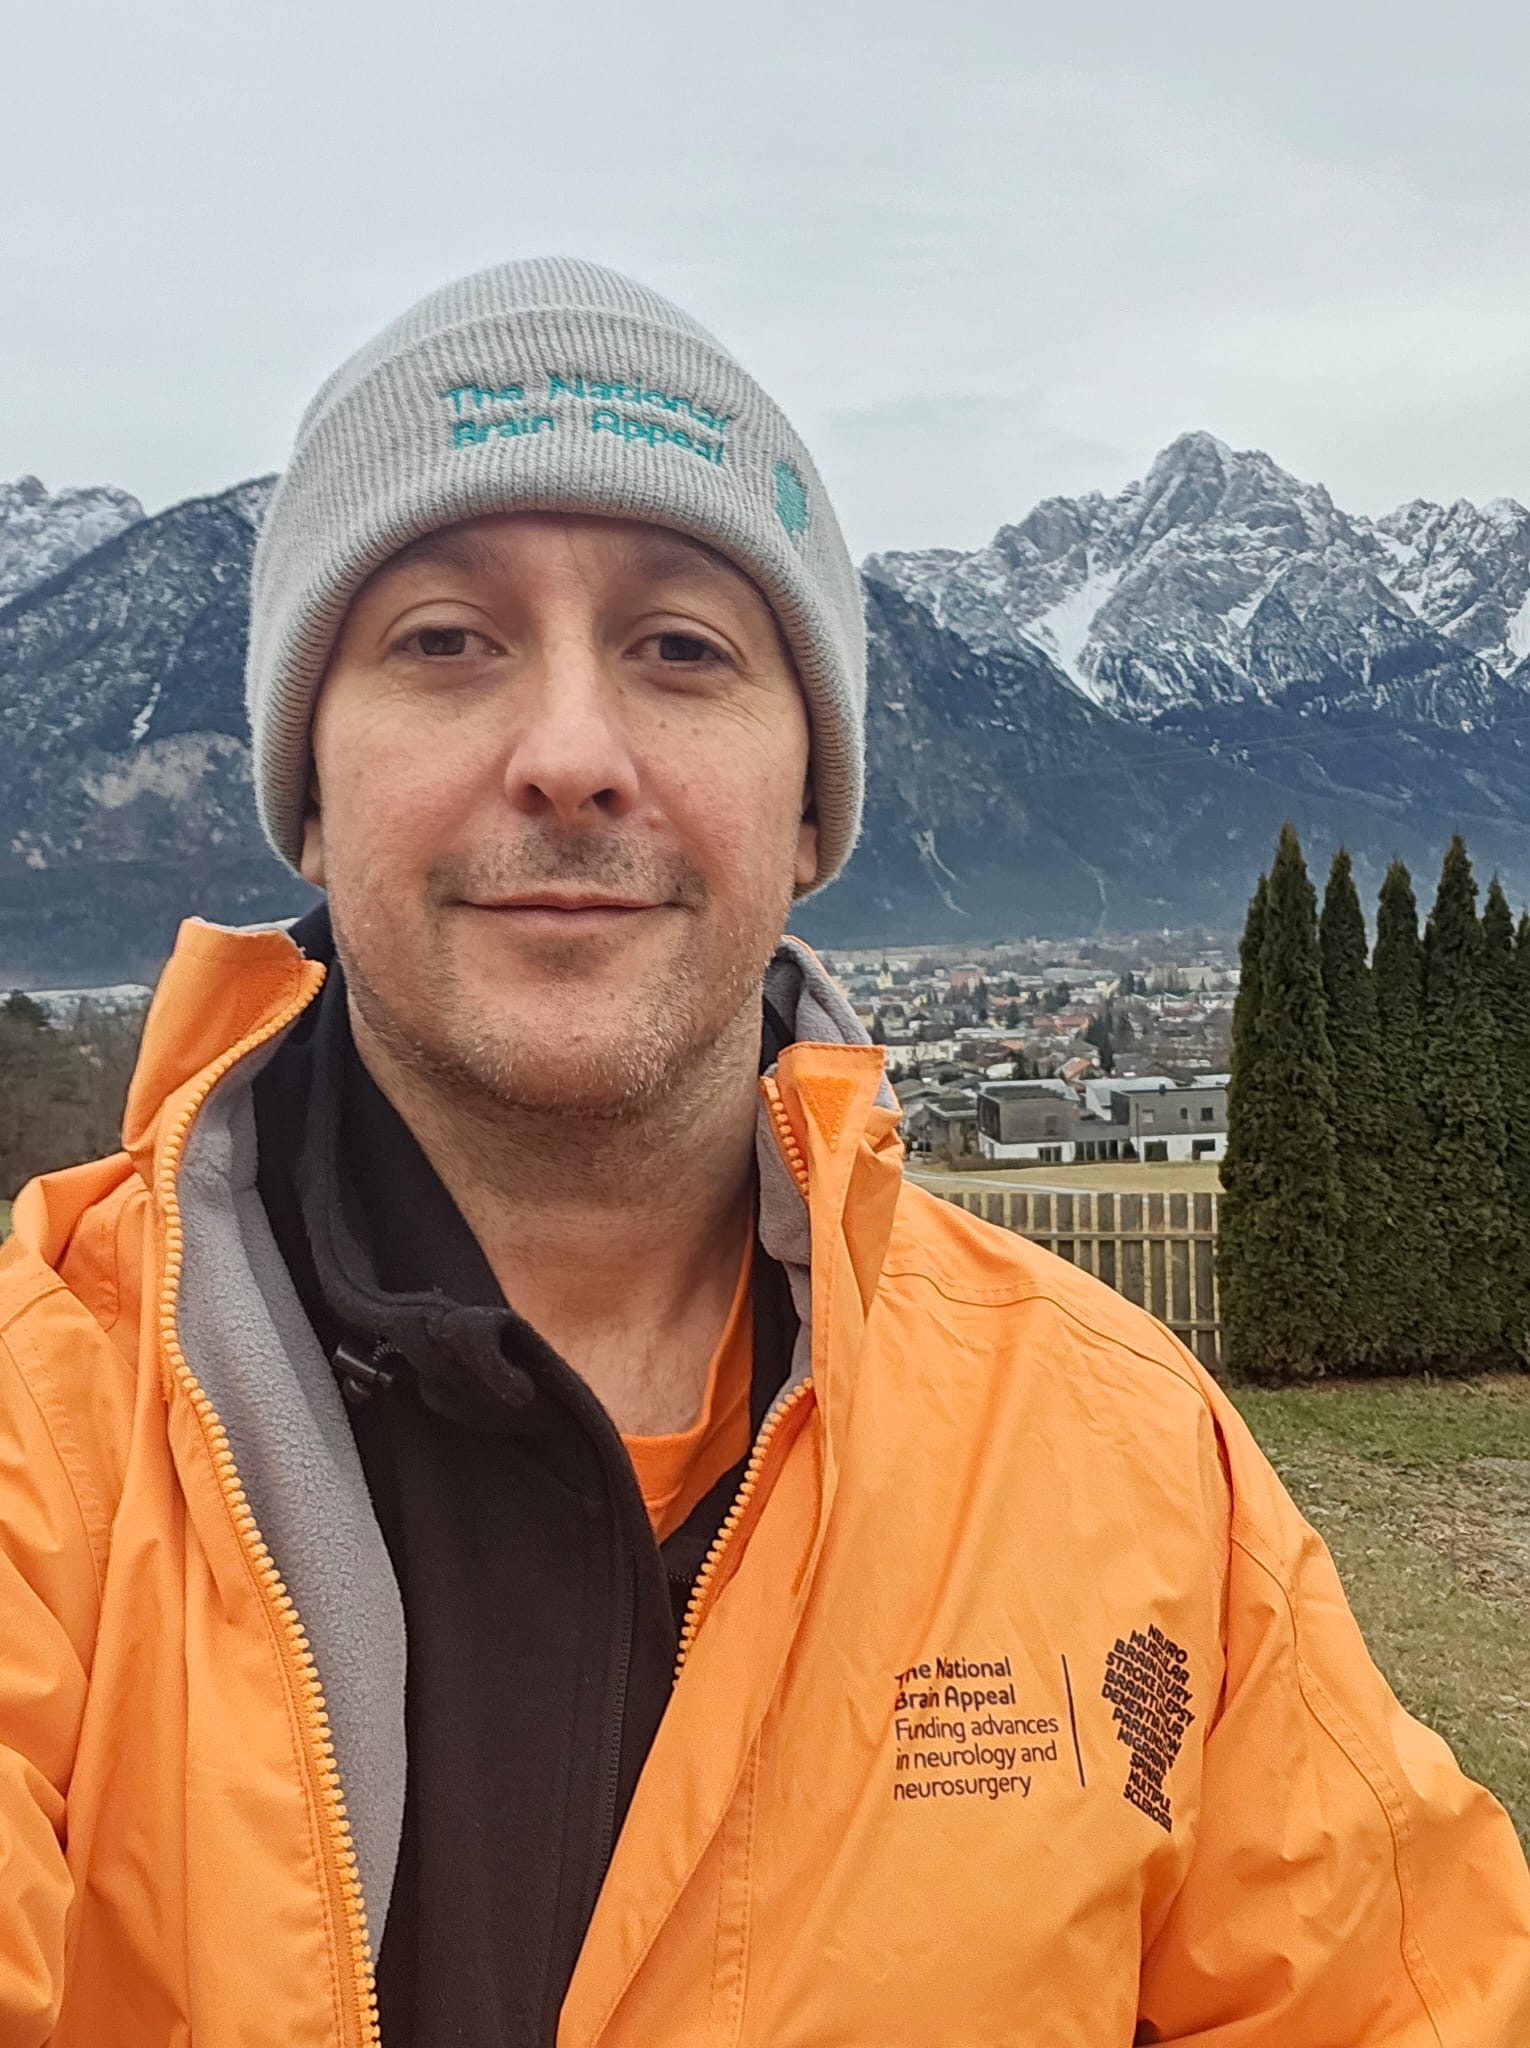 A photo of James Dick wearing an orange jacket and a hat with a mountain range behind him